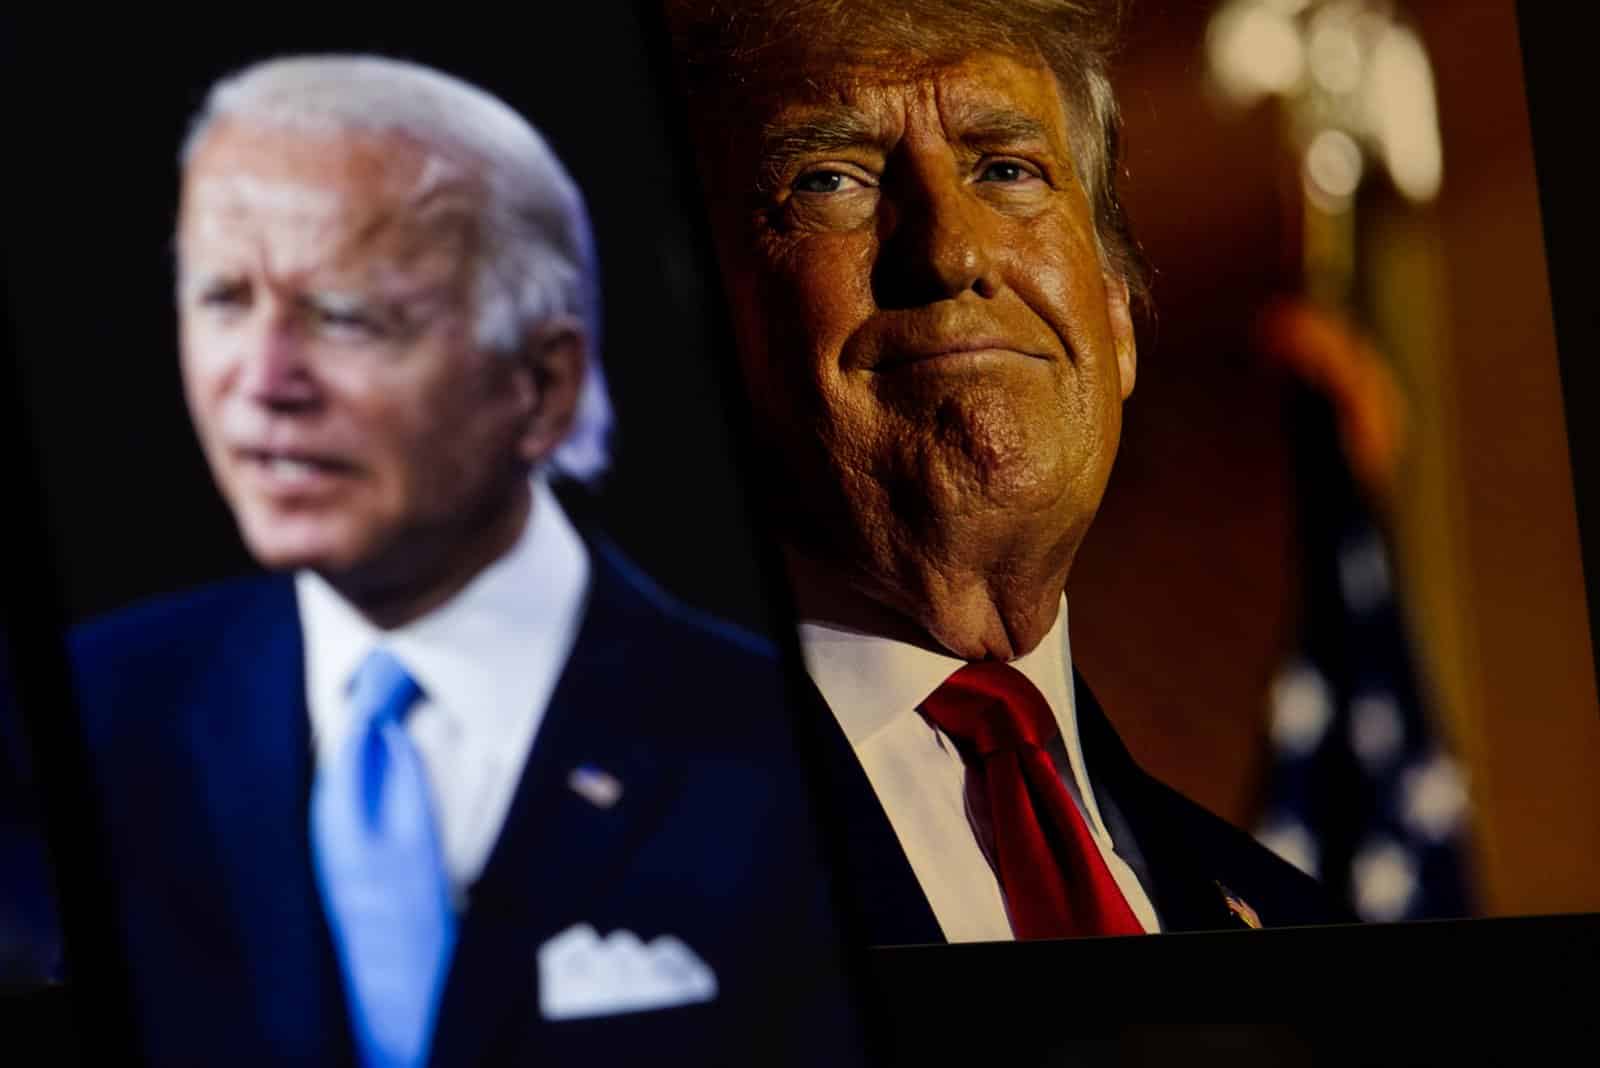 Image Credit: Shutterstock / Below the Sky <p><span>Upon taking office, President Joe Biden reversed several of Donald Trump’s key immigration policies, including the travel ban on several predominantly Muslim countries.</span></p>